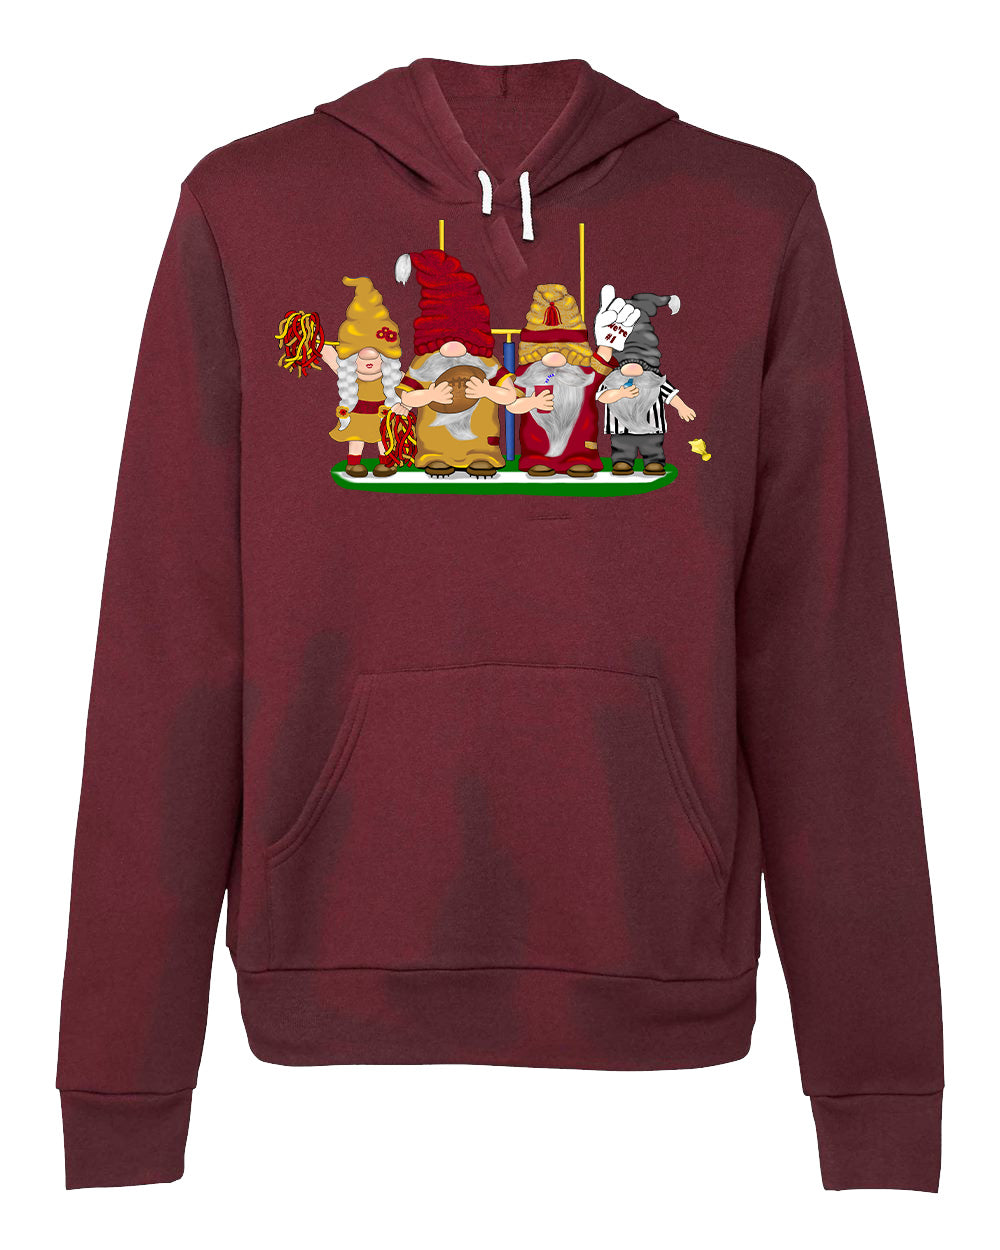 Burgundy & Gold Football Gnomes (similar to DC) on Unisex Hoodie